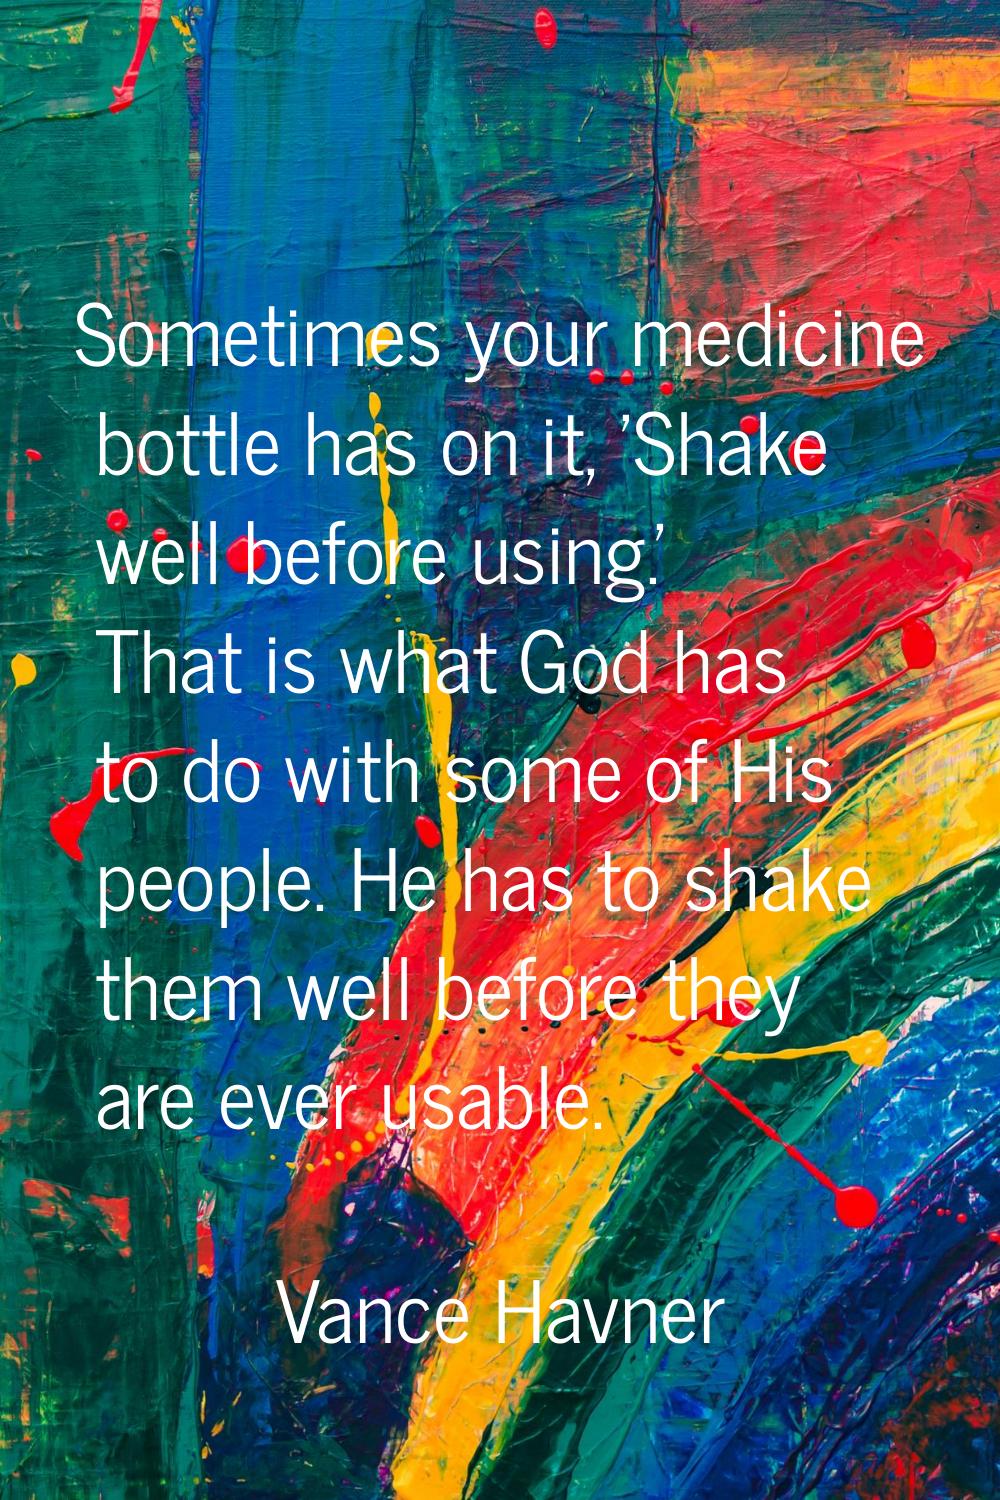 Sometimes your medicine bottle has on it, 'Shake well before using.' That is what God has to do wit